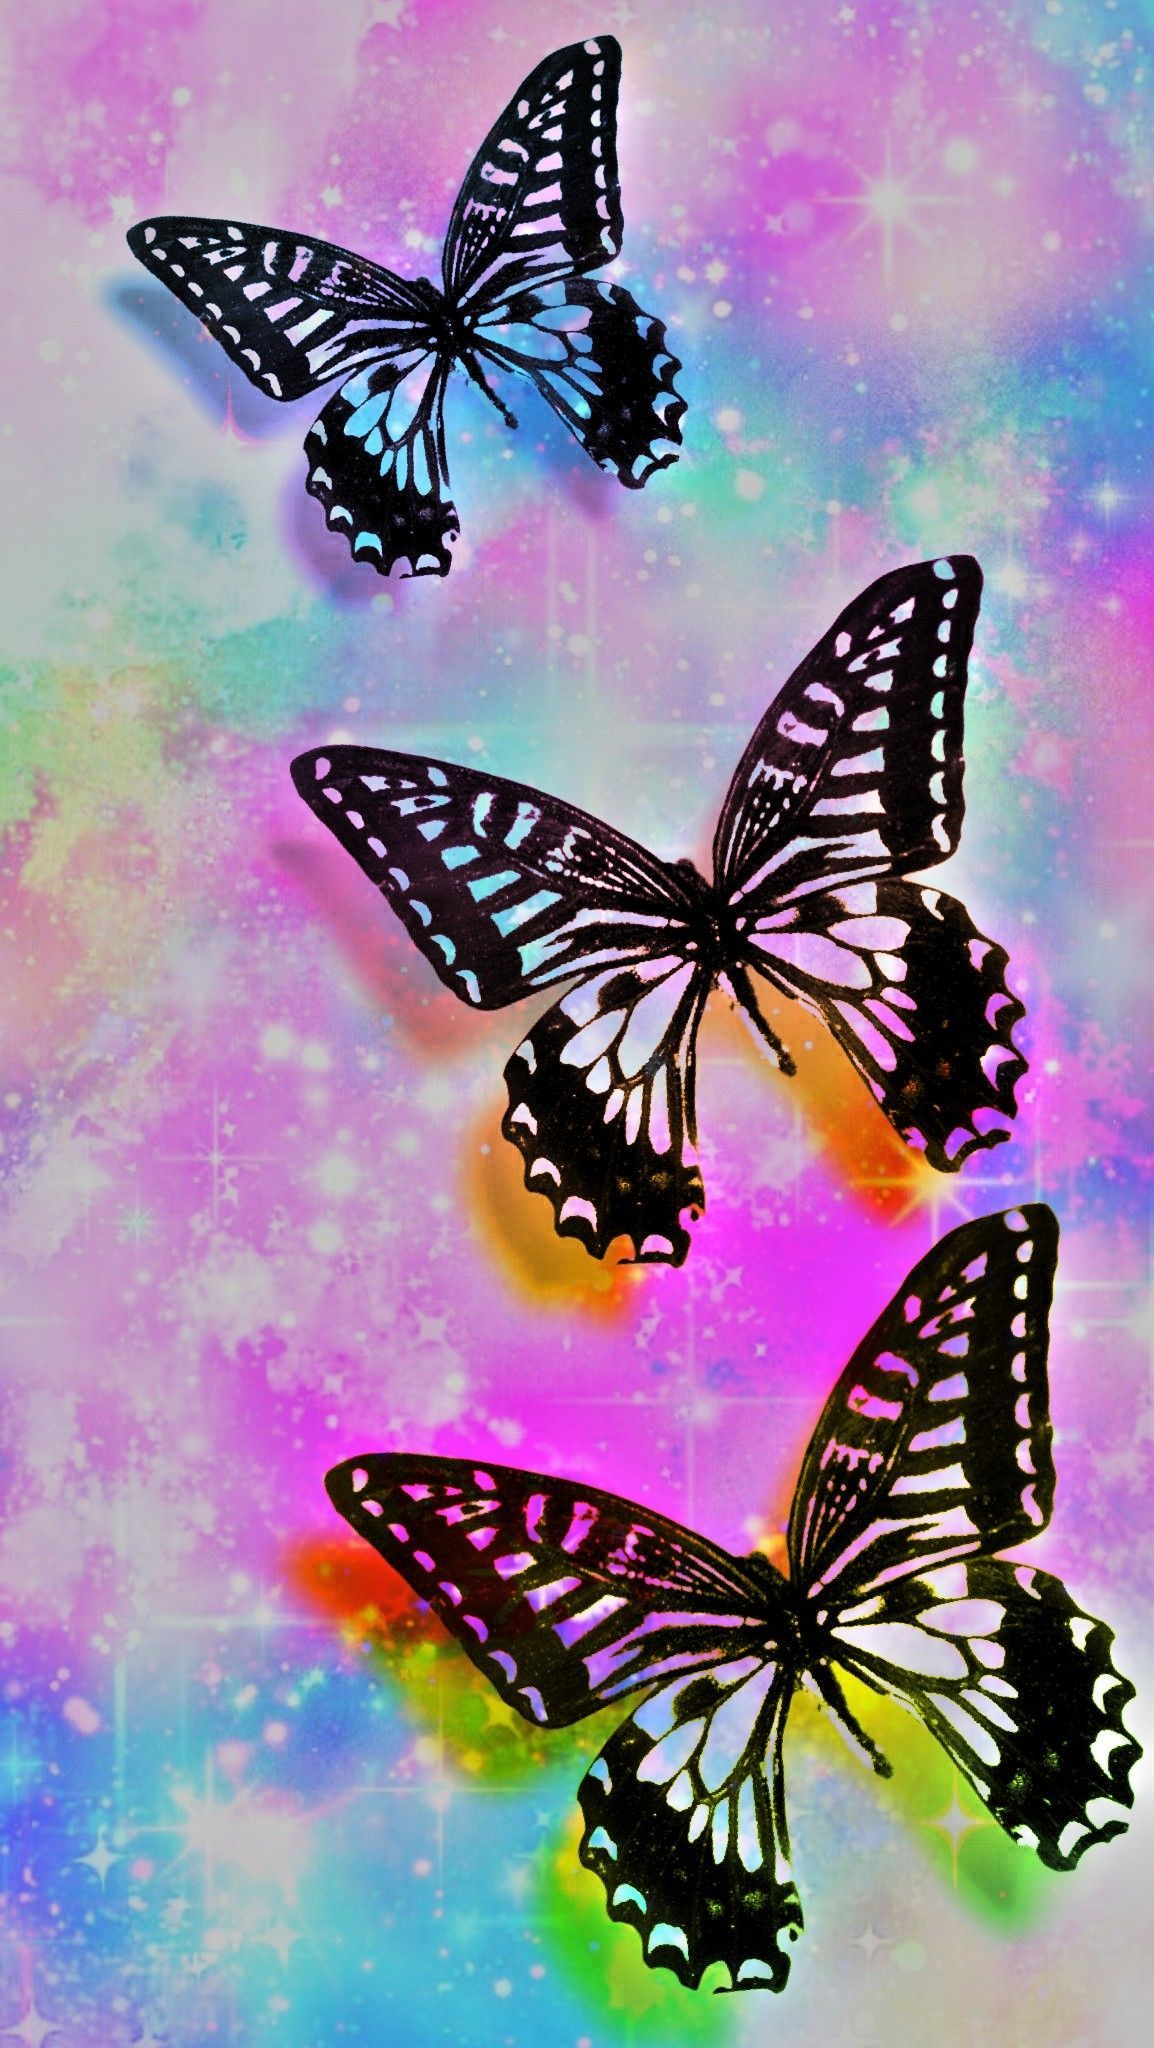 Rainbow Watercolor Butterflies, made by me. Butterfly wallpaper, Butterfly art, Butterfly watercolor